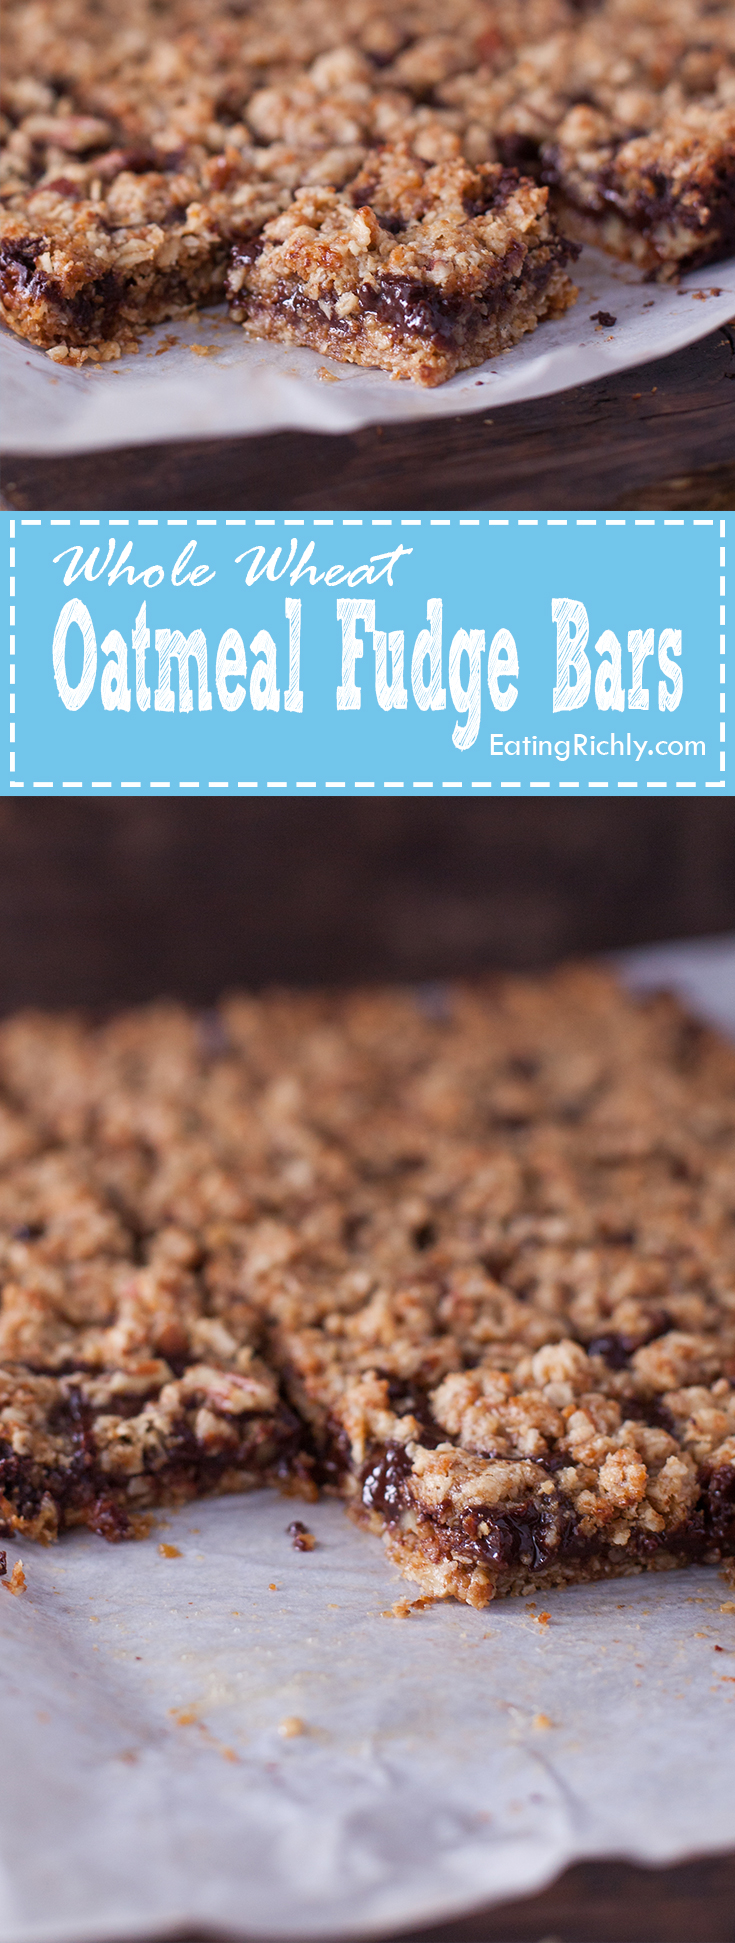 These whole wheat oatmeal fudge bars are easy to make, and full of gooey fudgy chocolate. Made with whole ingredients! Part of #MiniChefMondays on EatingRichly.com